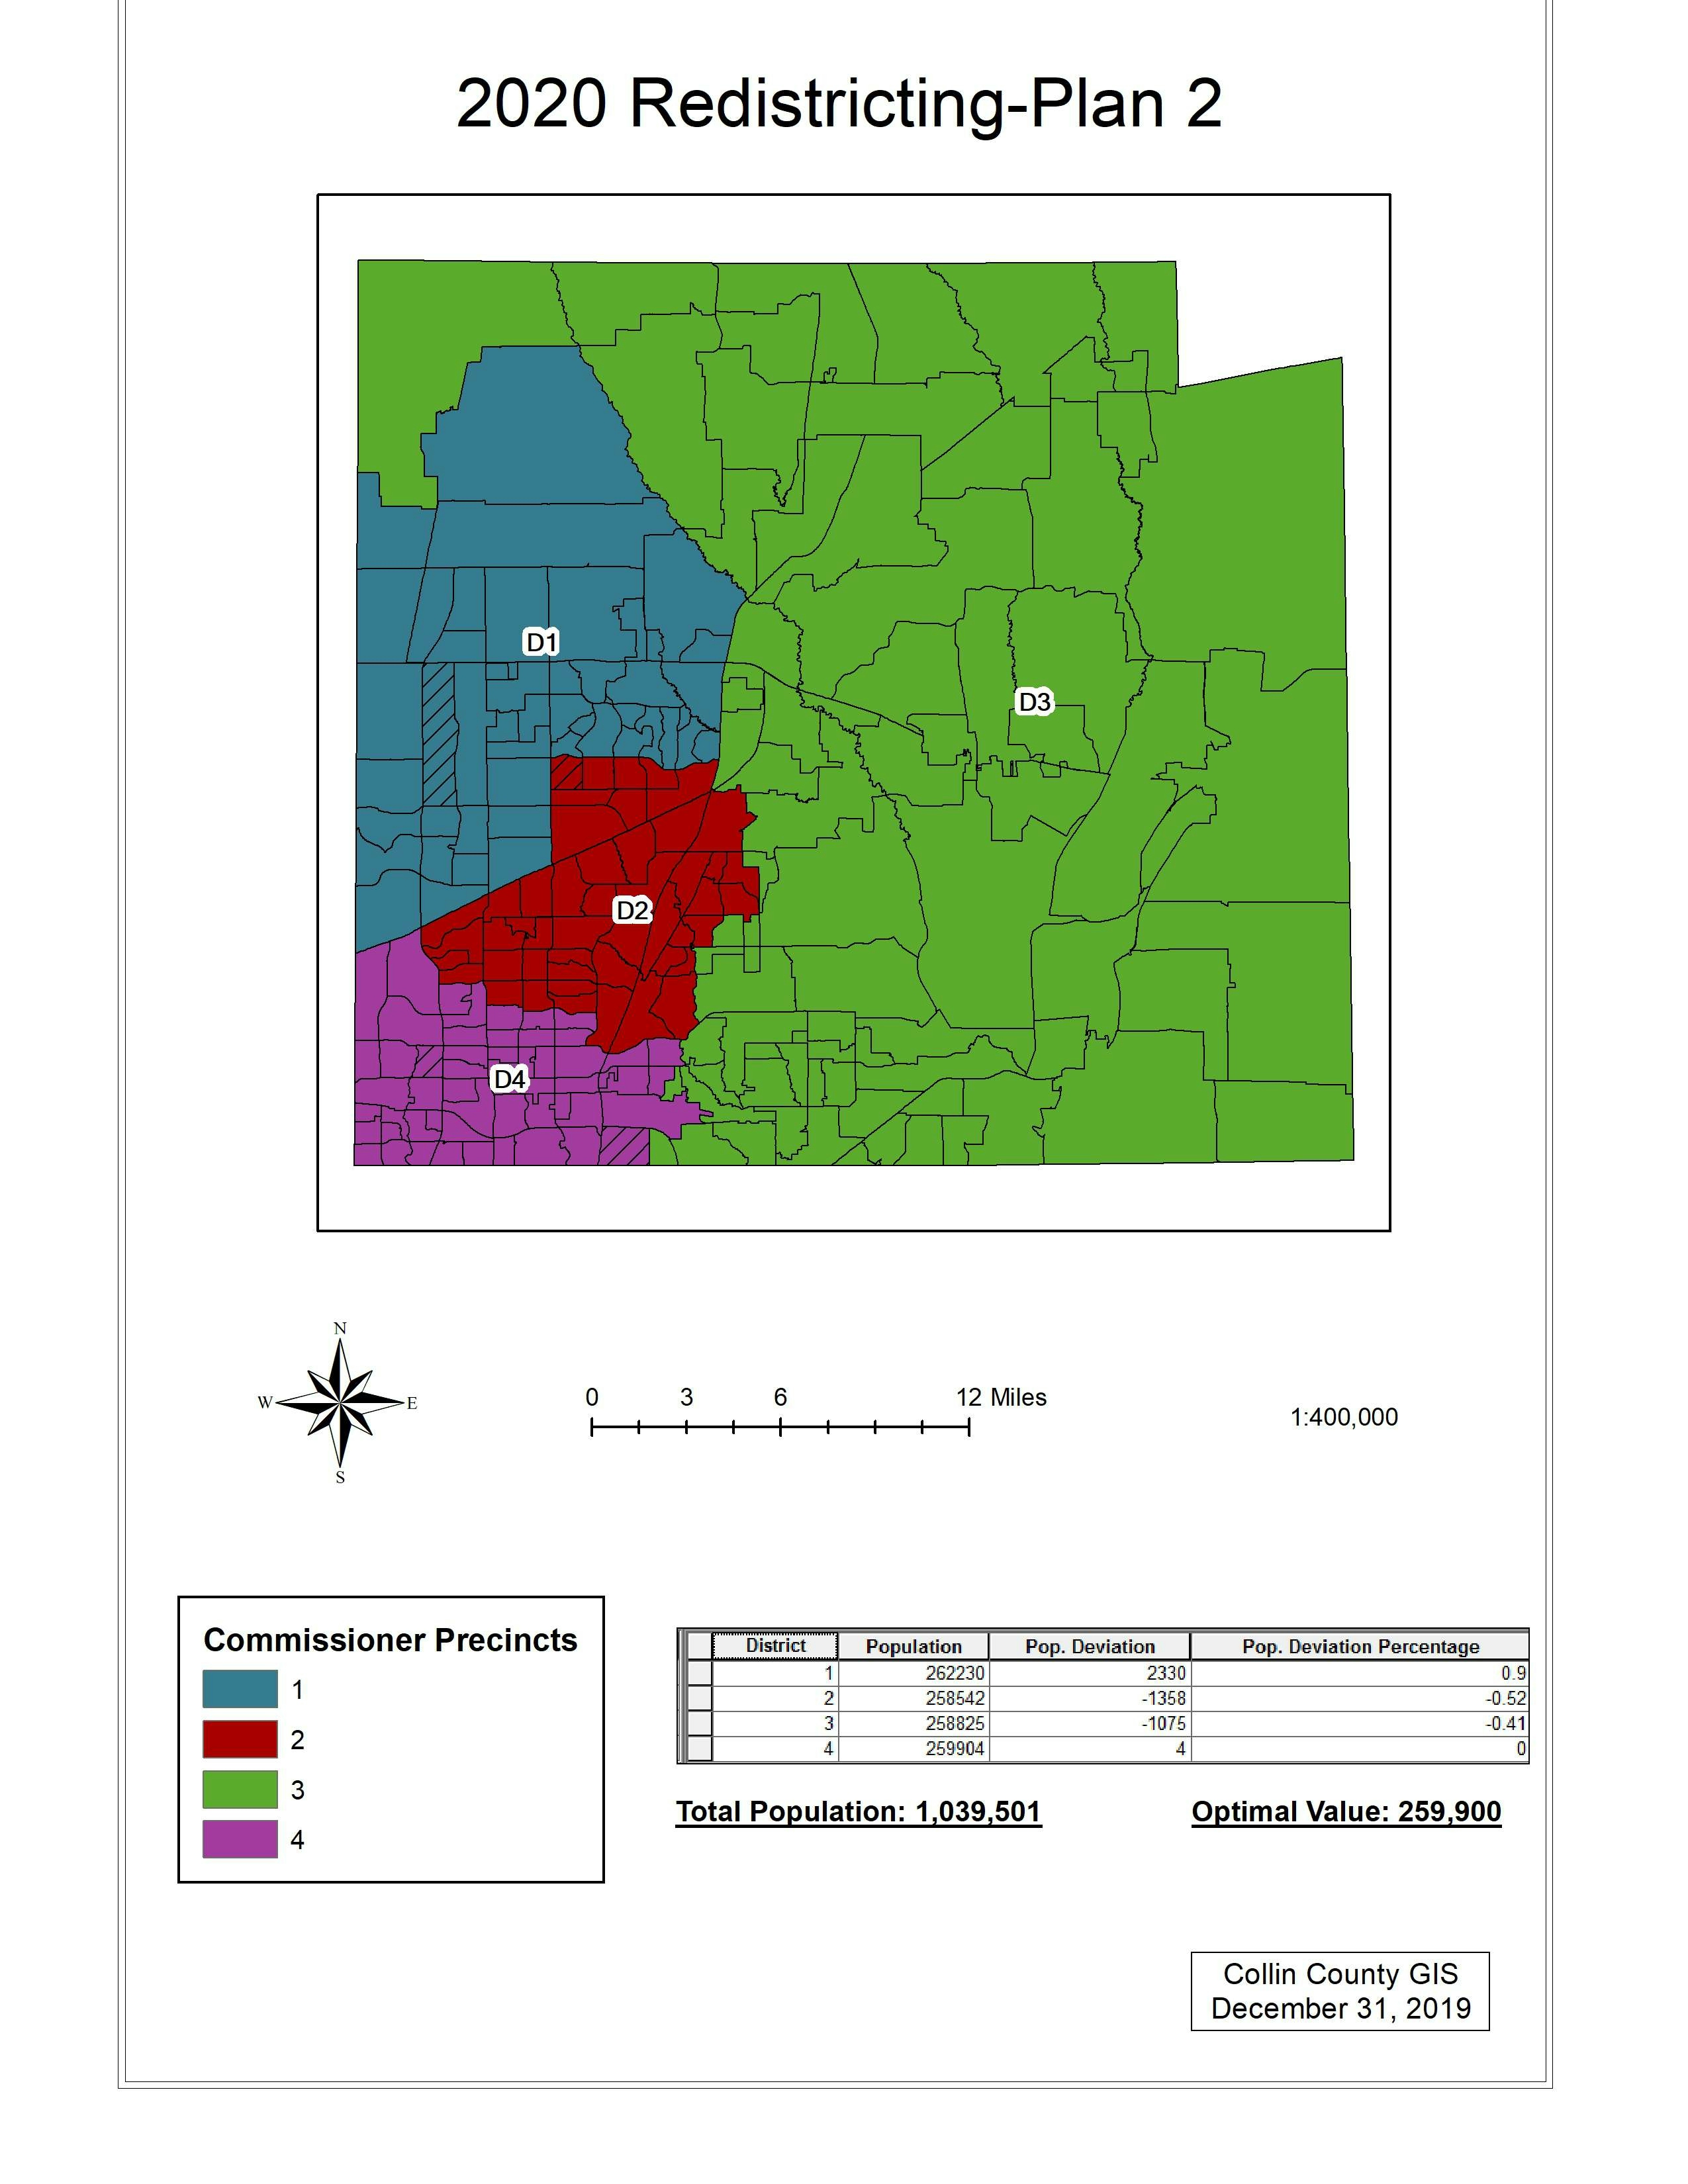 Redistricting Plan 2-Collin County